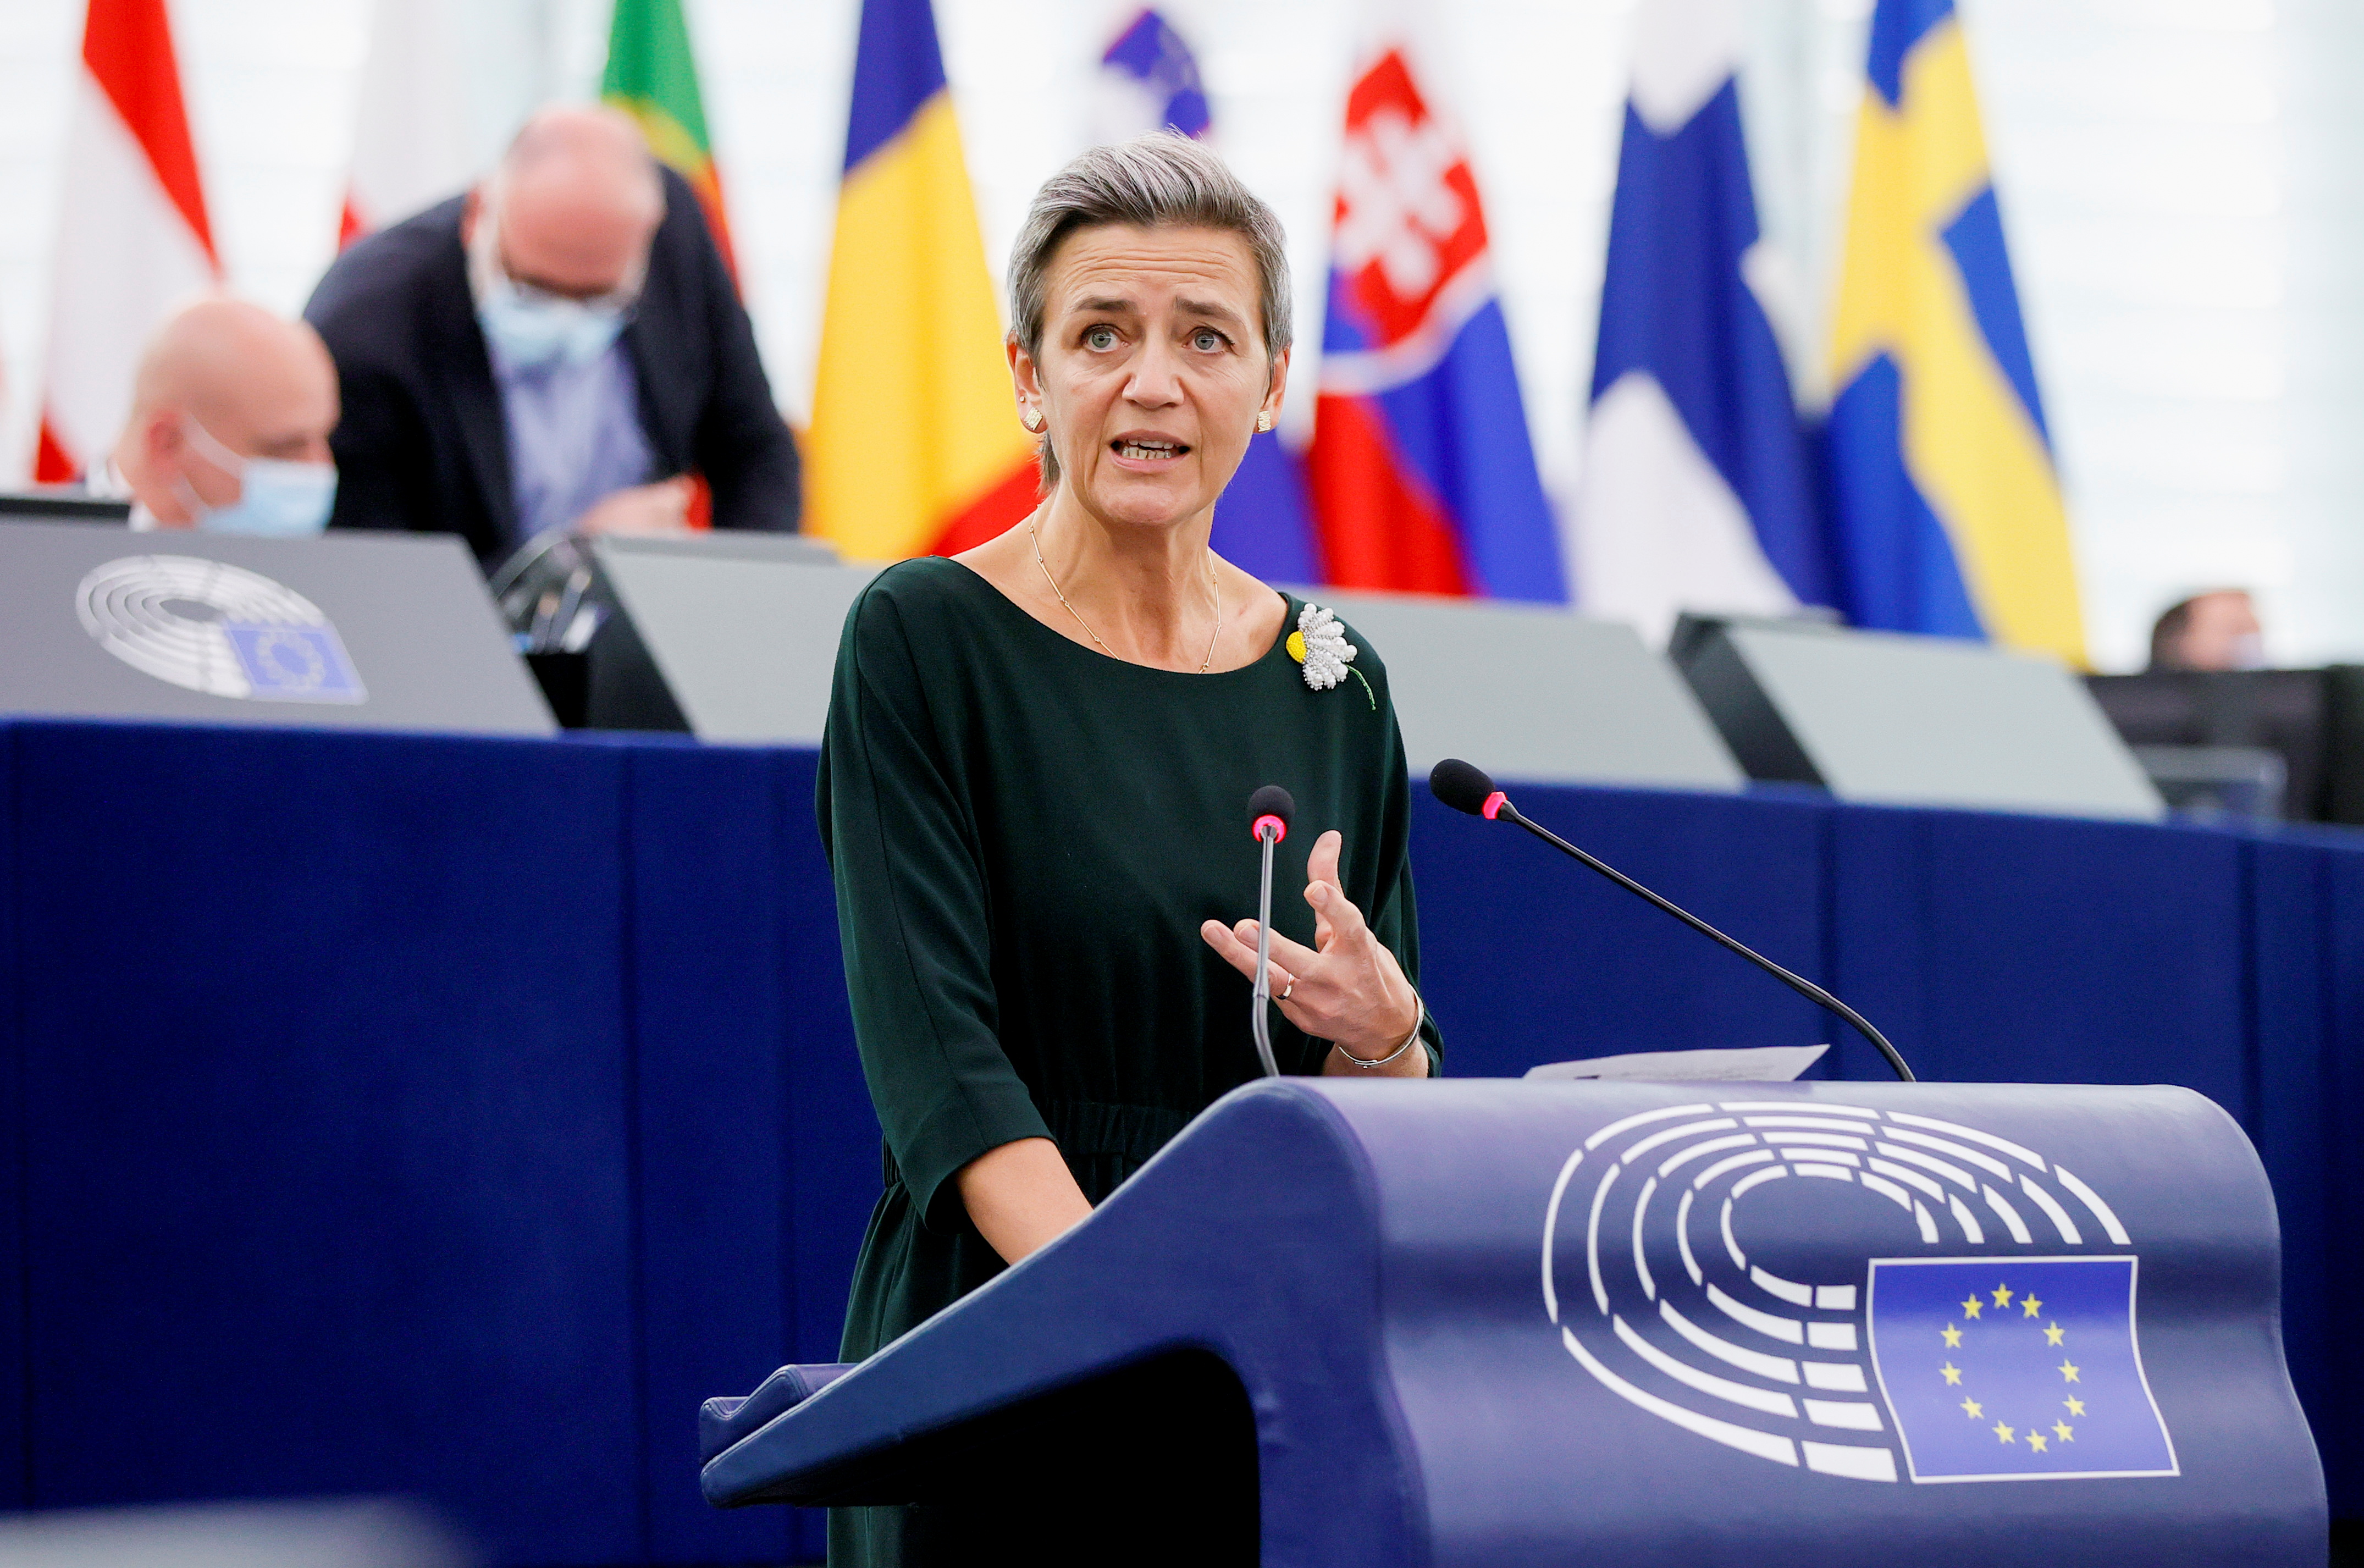 European Commission's executive Vice President Margrethe Vestager delivers a speech during a debate on EU-Taiwan political relations and cooperation at the European Parliament in Strasbourg